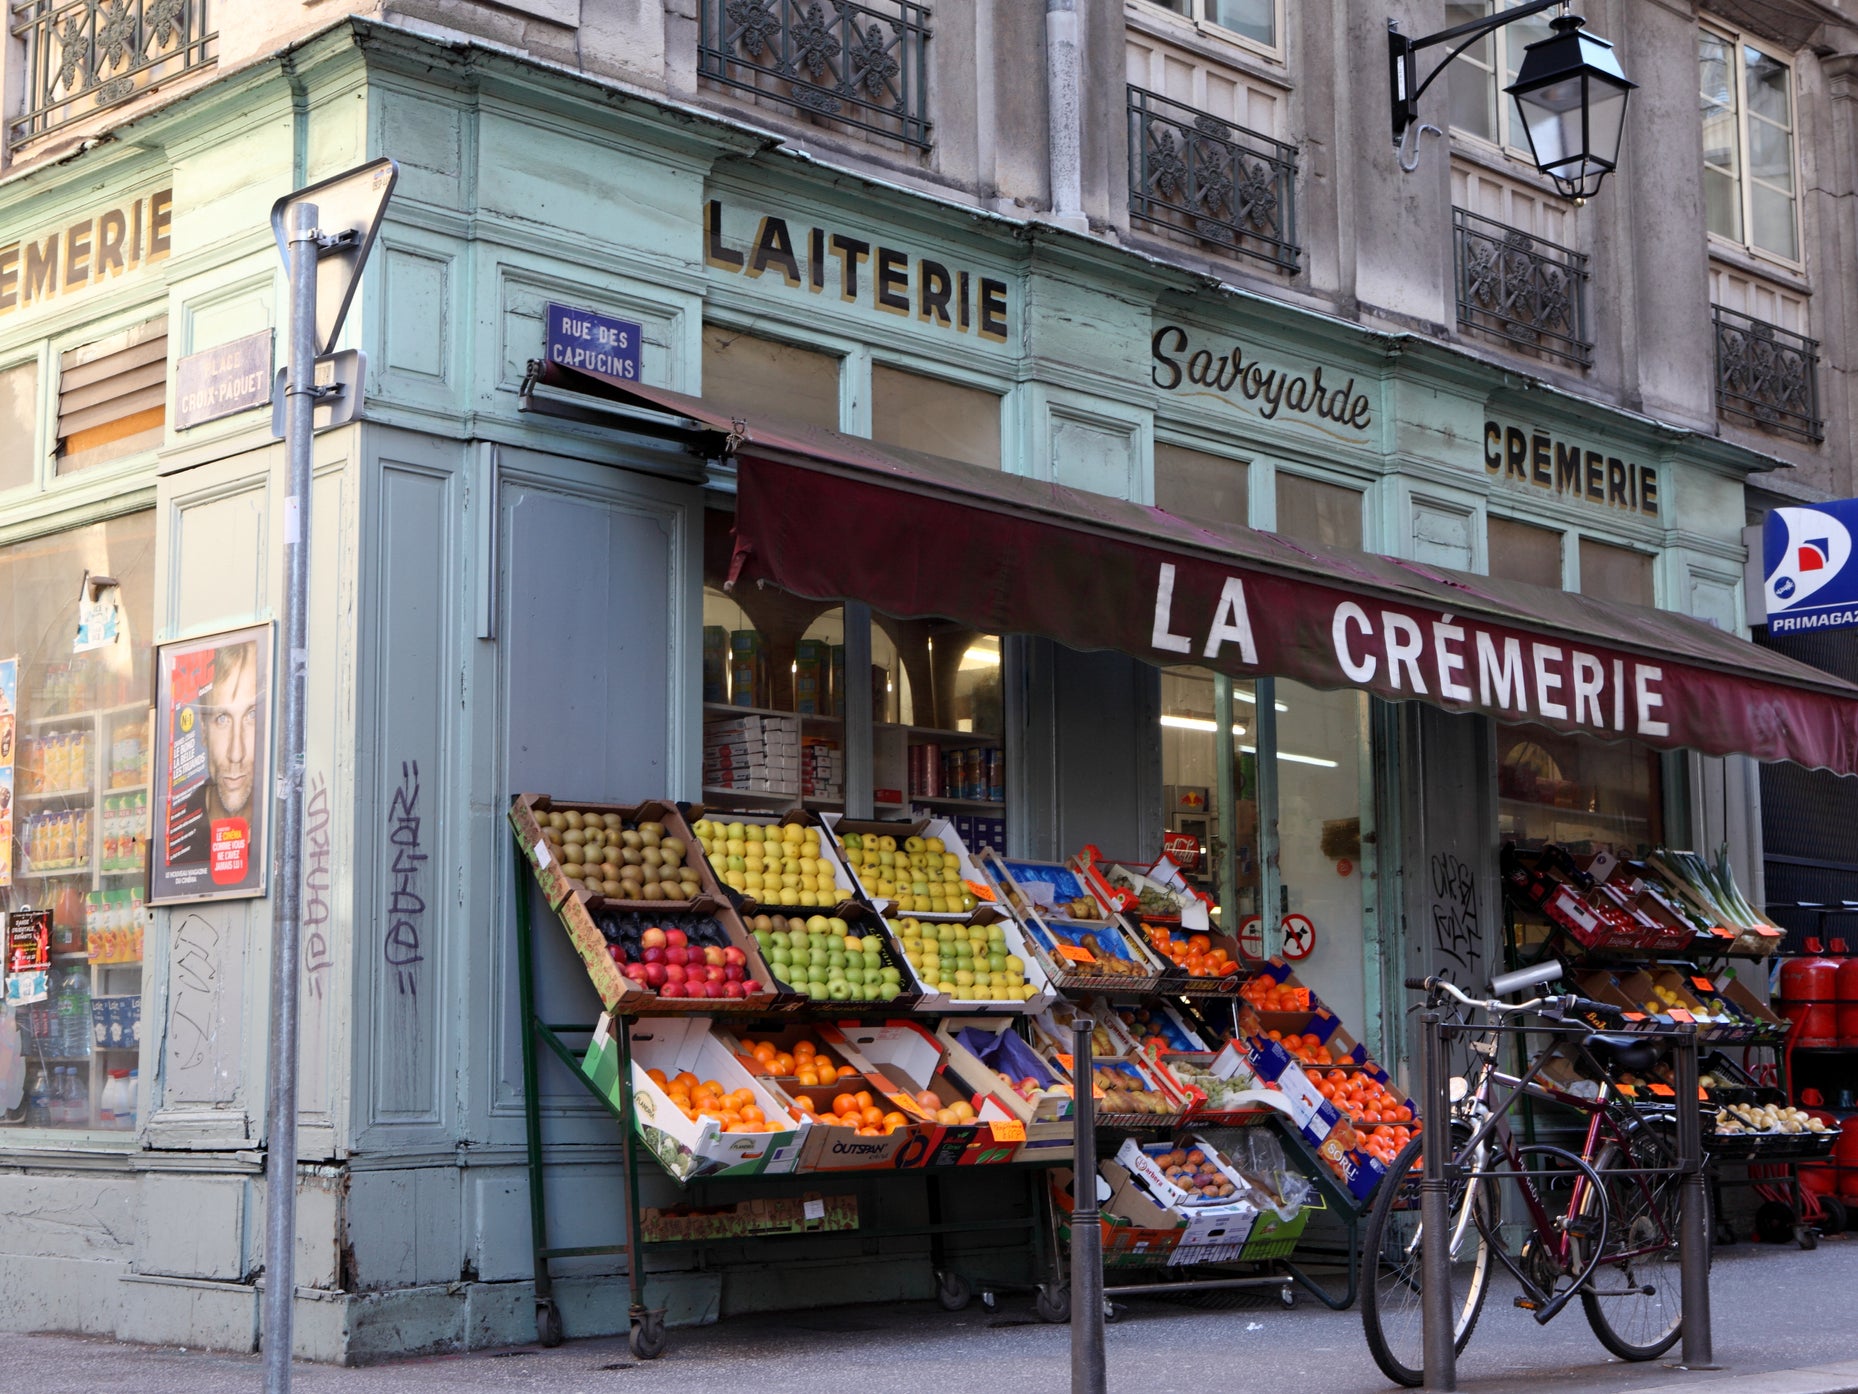 French shops running air conditioning in summer or heating in winter must close their doors to improve energy efficiency